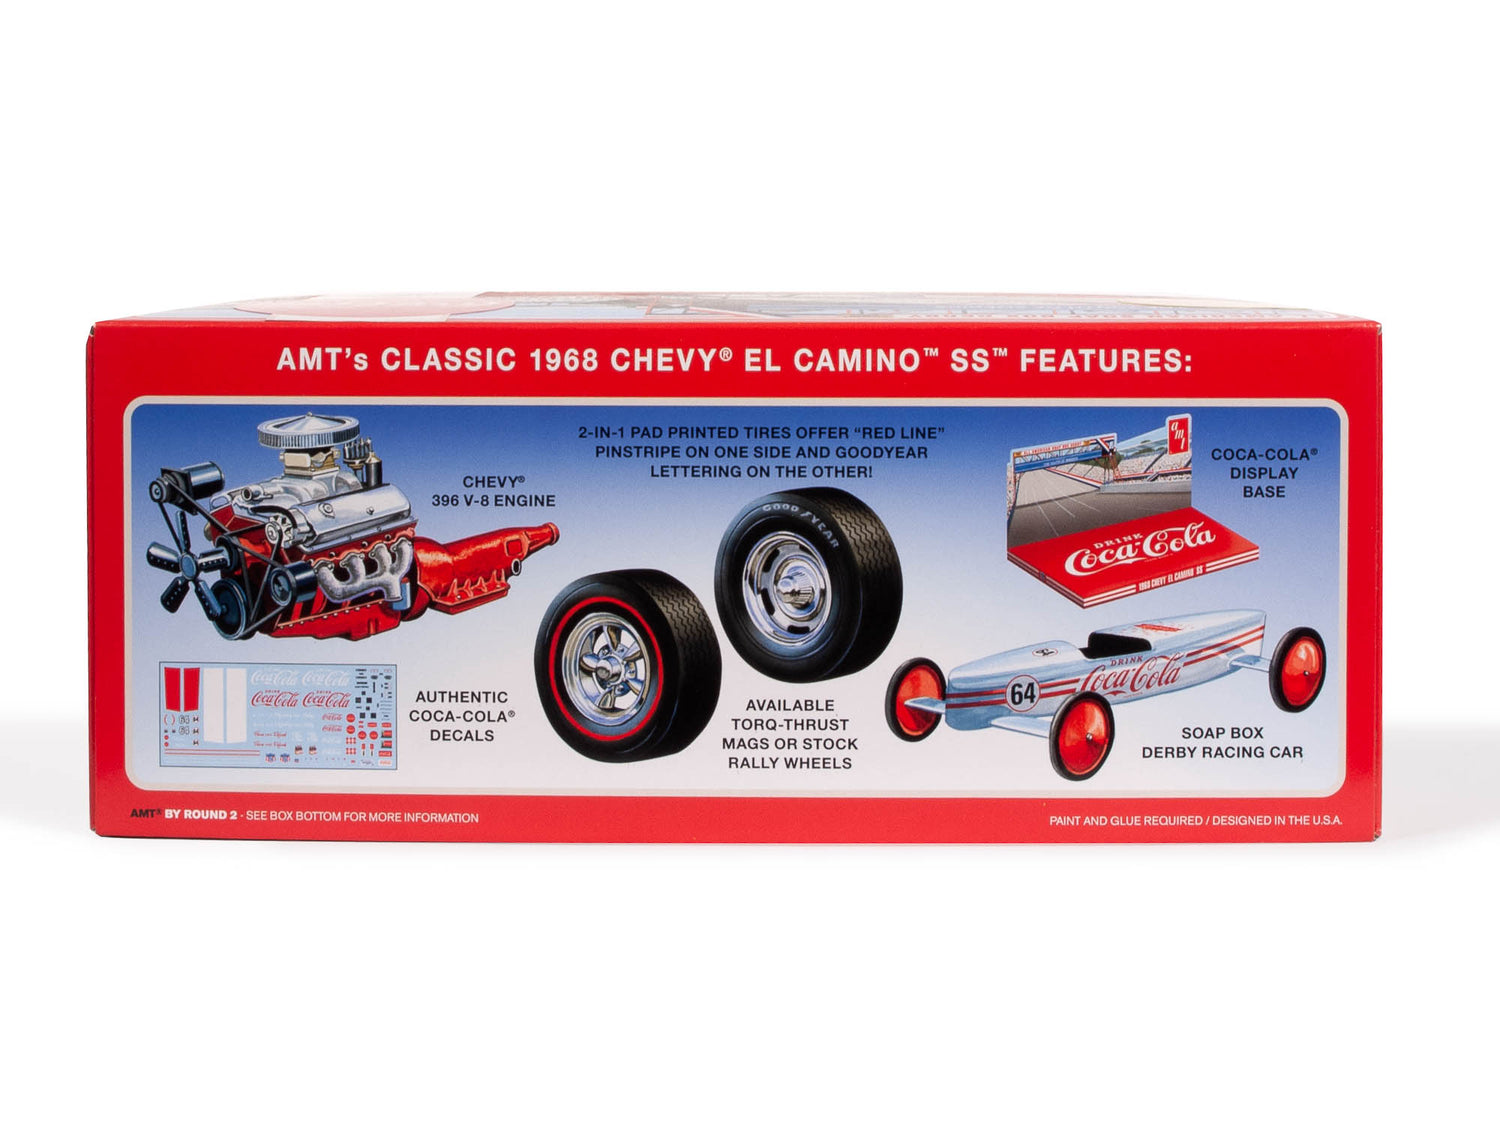 Features of AMT 1968 Chevy El Camino SS (Coca-Cola) 1:25 Scale Model Kit